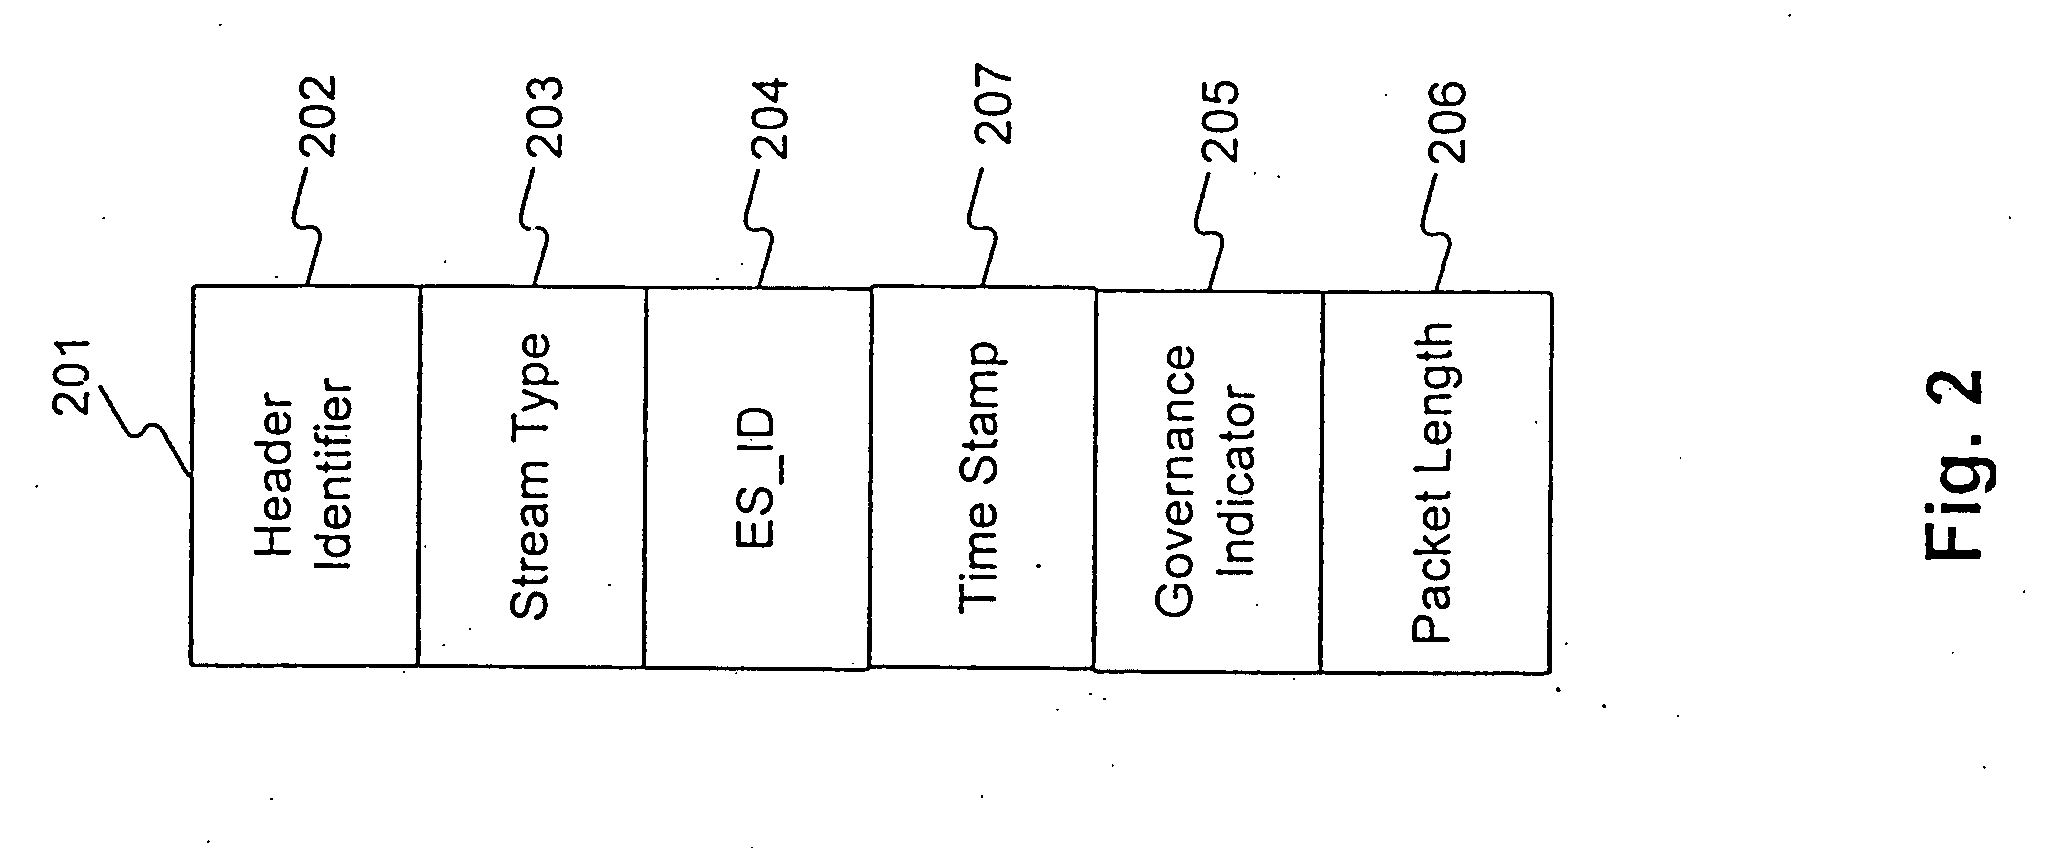 Methods and apparatus for persistent control and protection of content